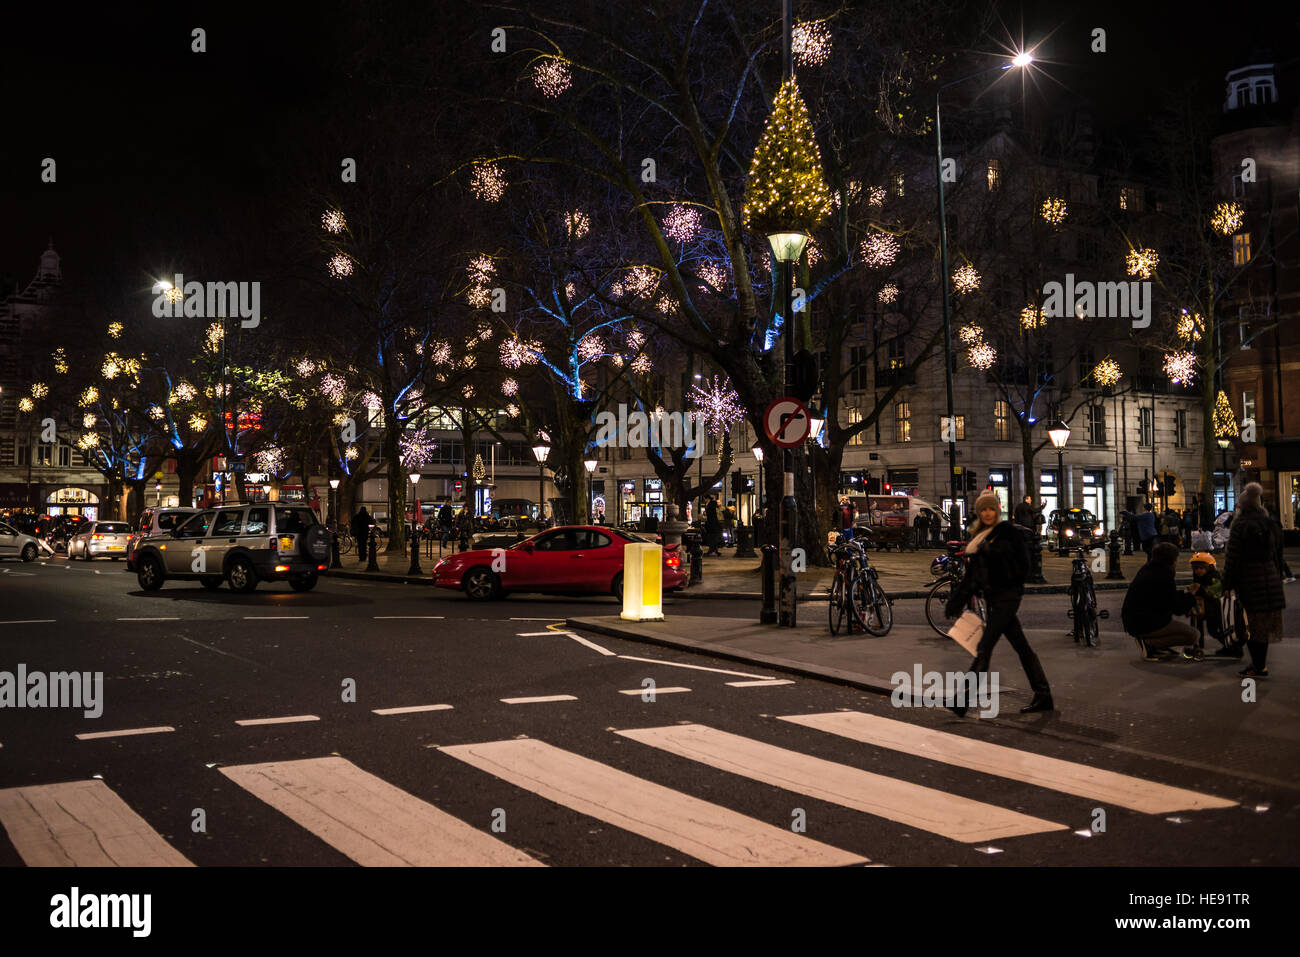 London, England - 17 December 2016: Night view of Sloane Square with Christmas light decorations and people crossing the road in Chelsea, London, UK. Stock Photo